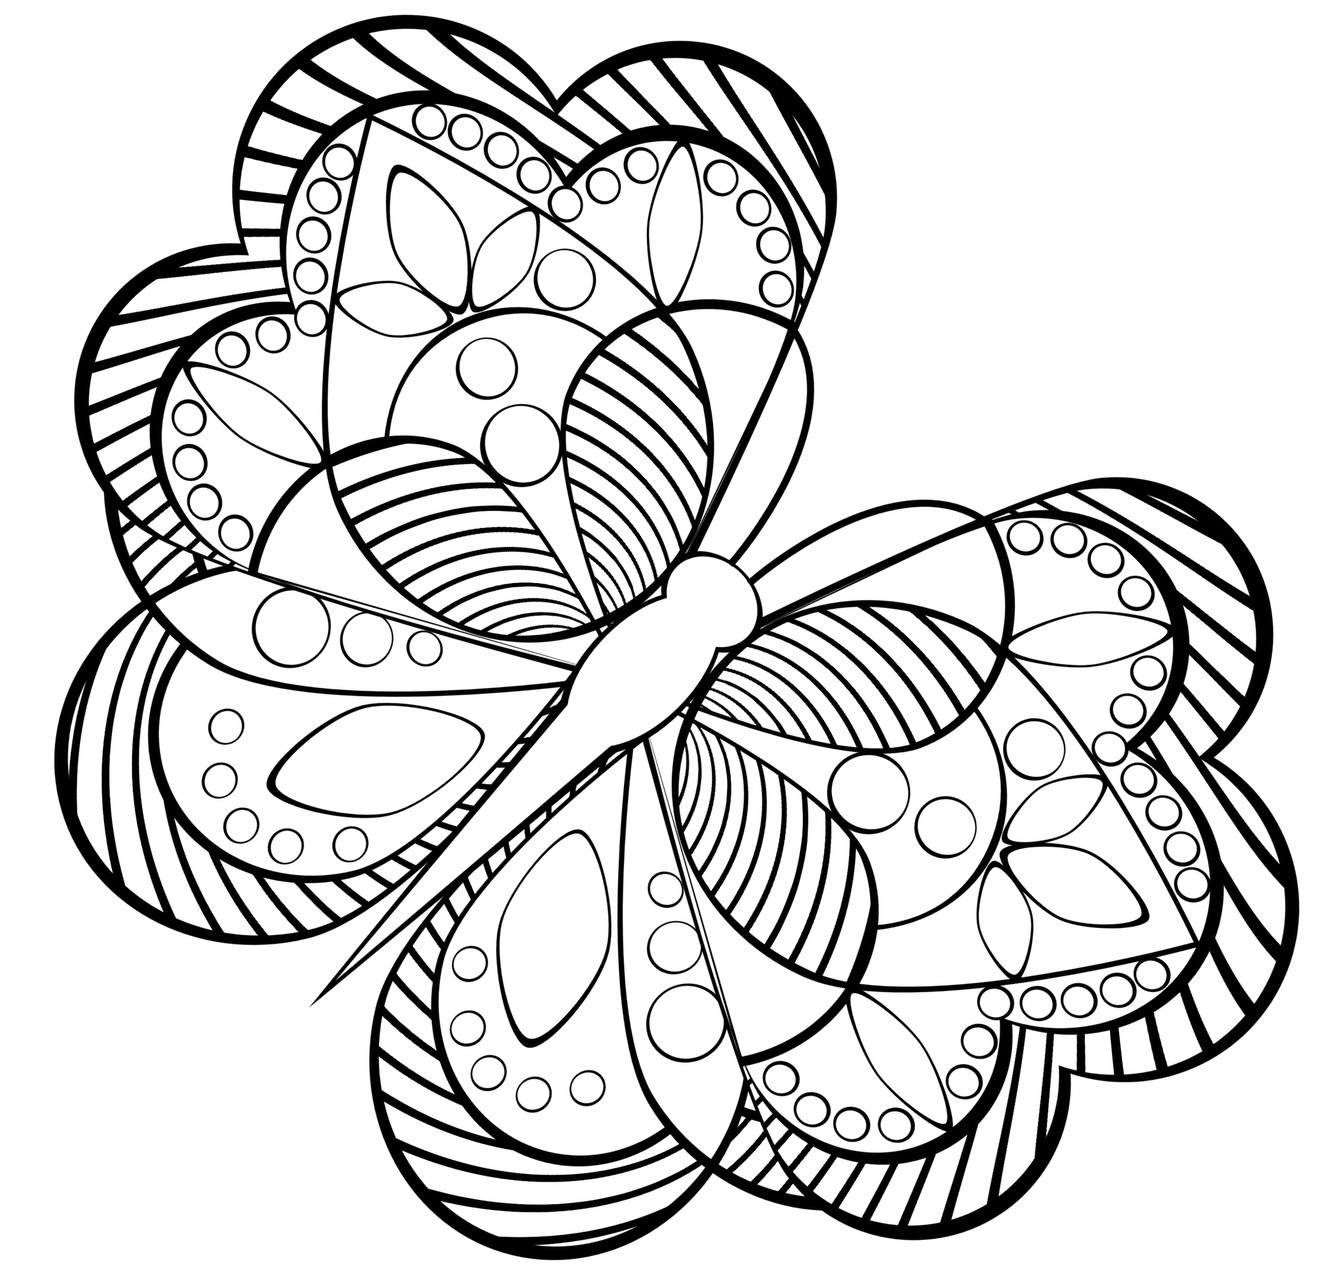 Free Printable Coloring Pages For Adults
 Free Coloring Pages For Adults To Print Special Image 12